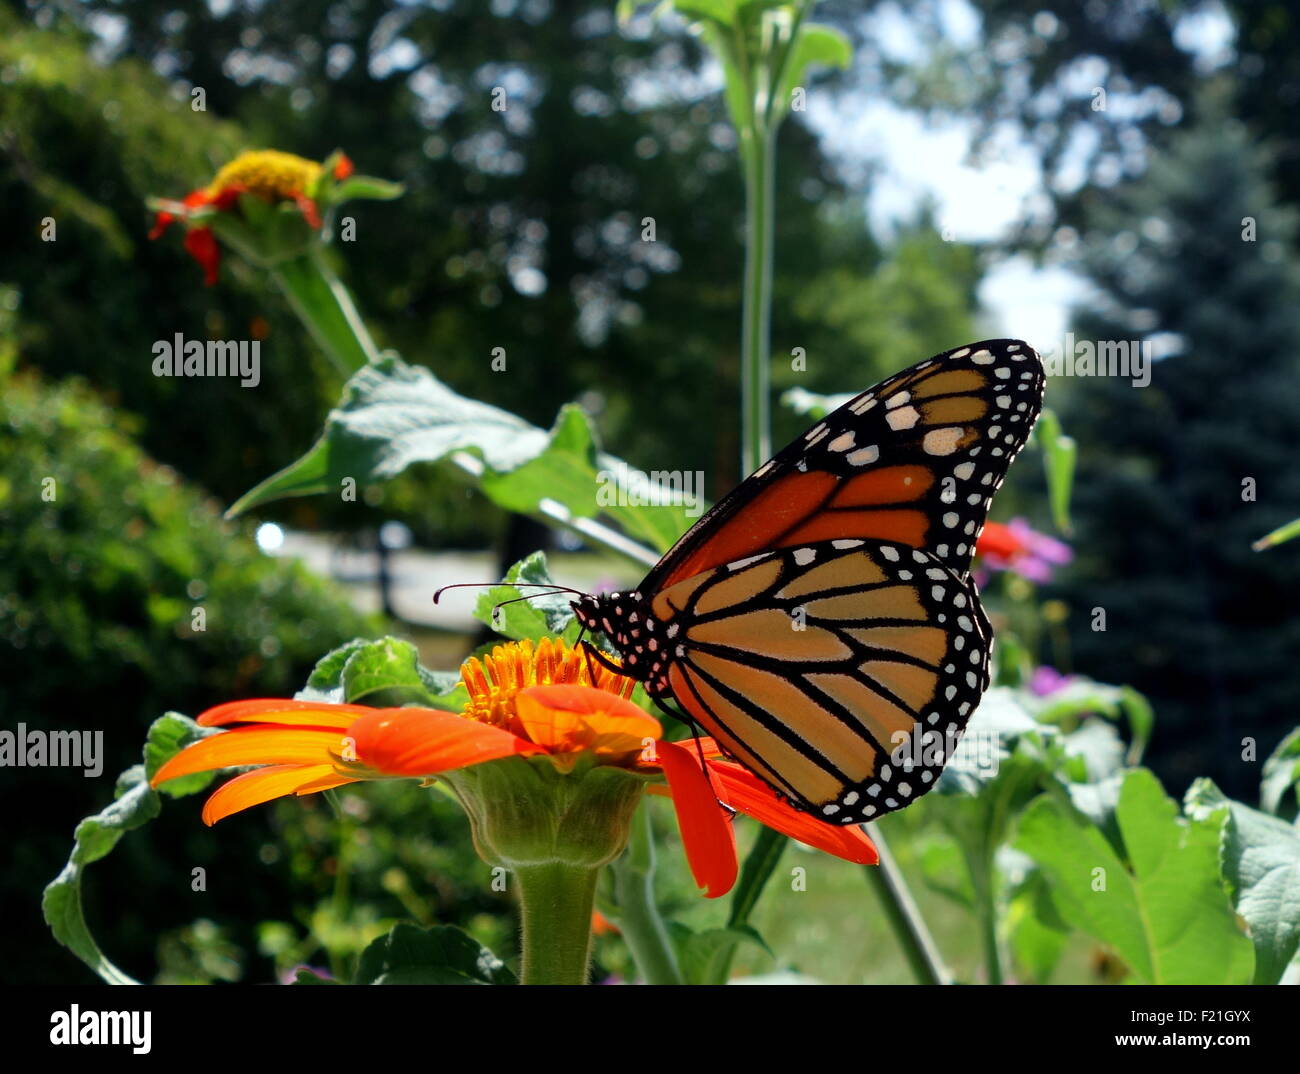 Monarch butterfly on Mexican Sunflower close up Stock Photo